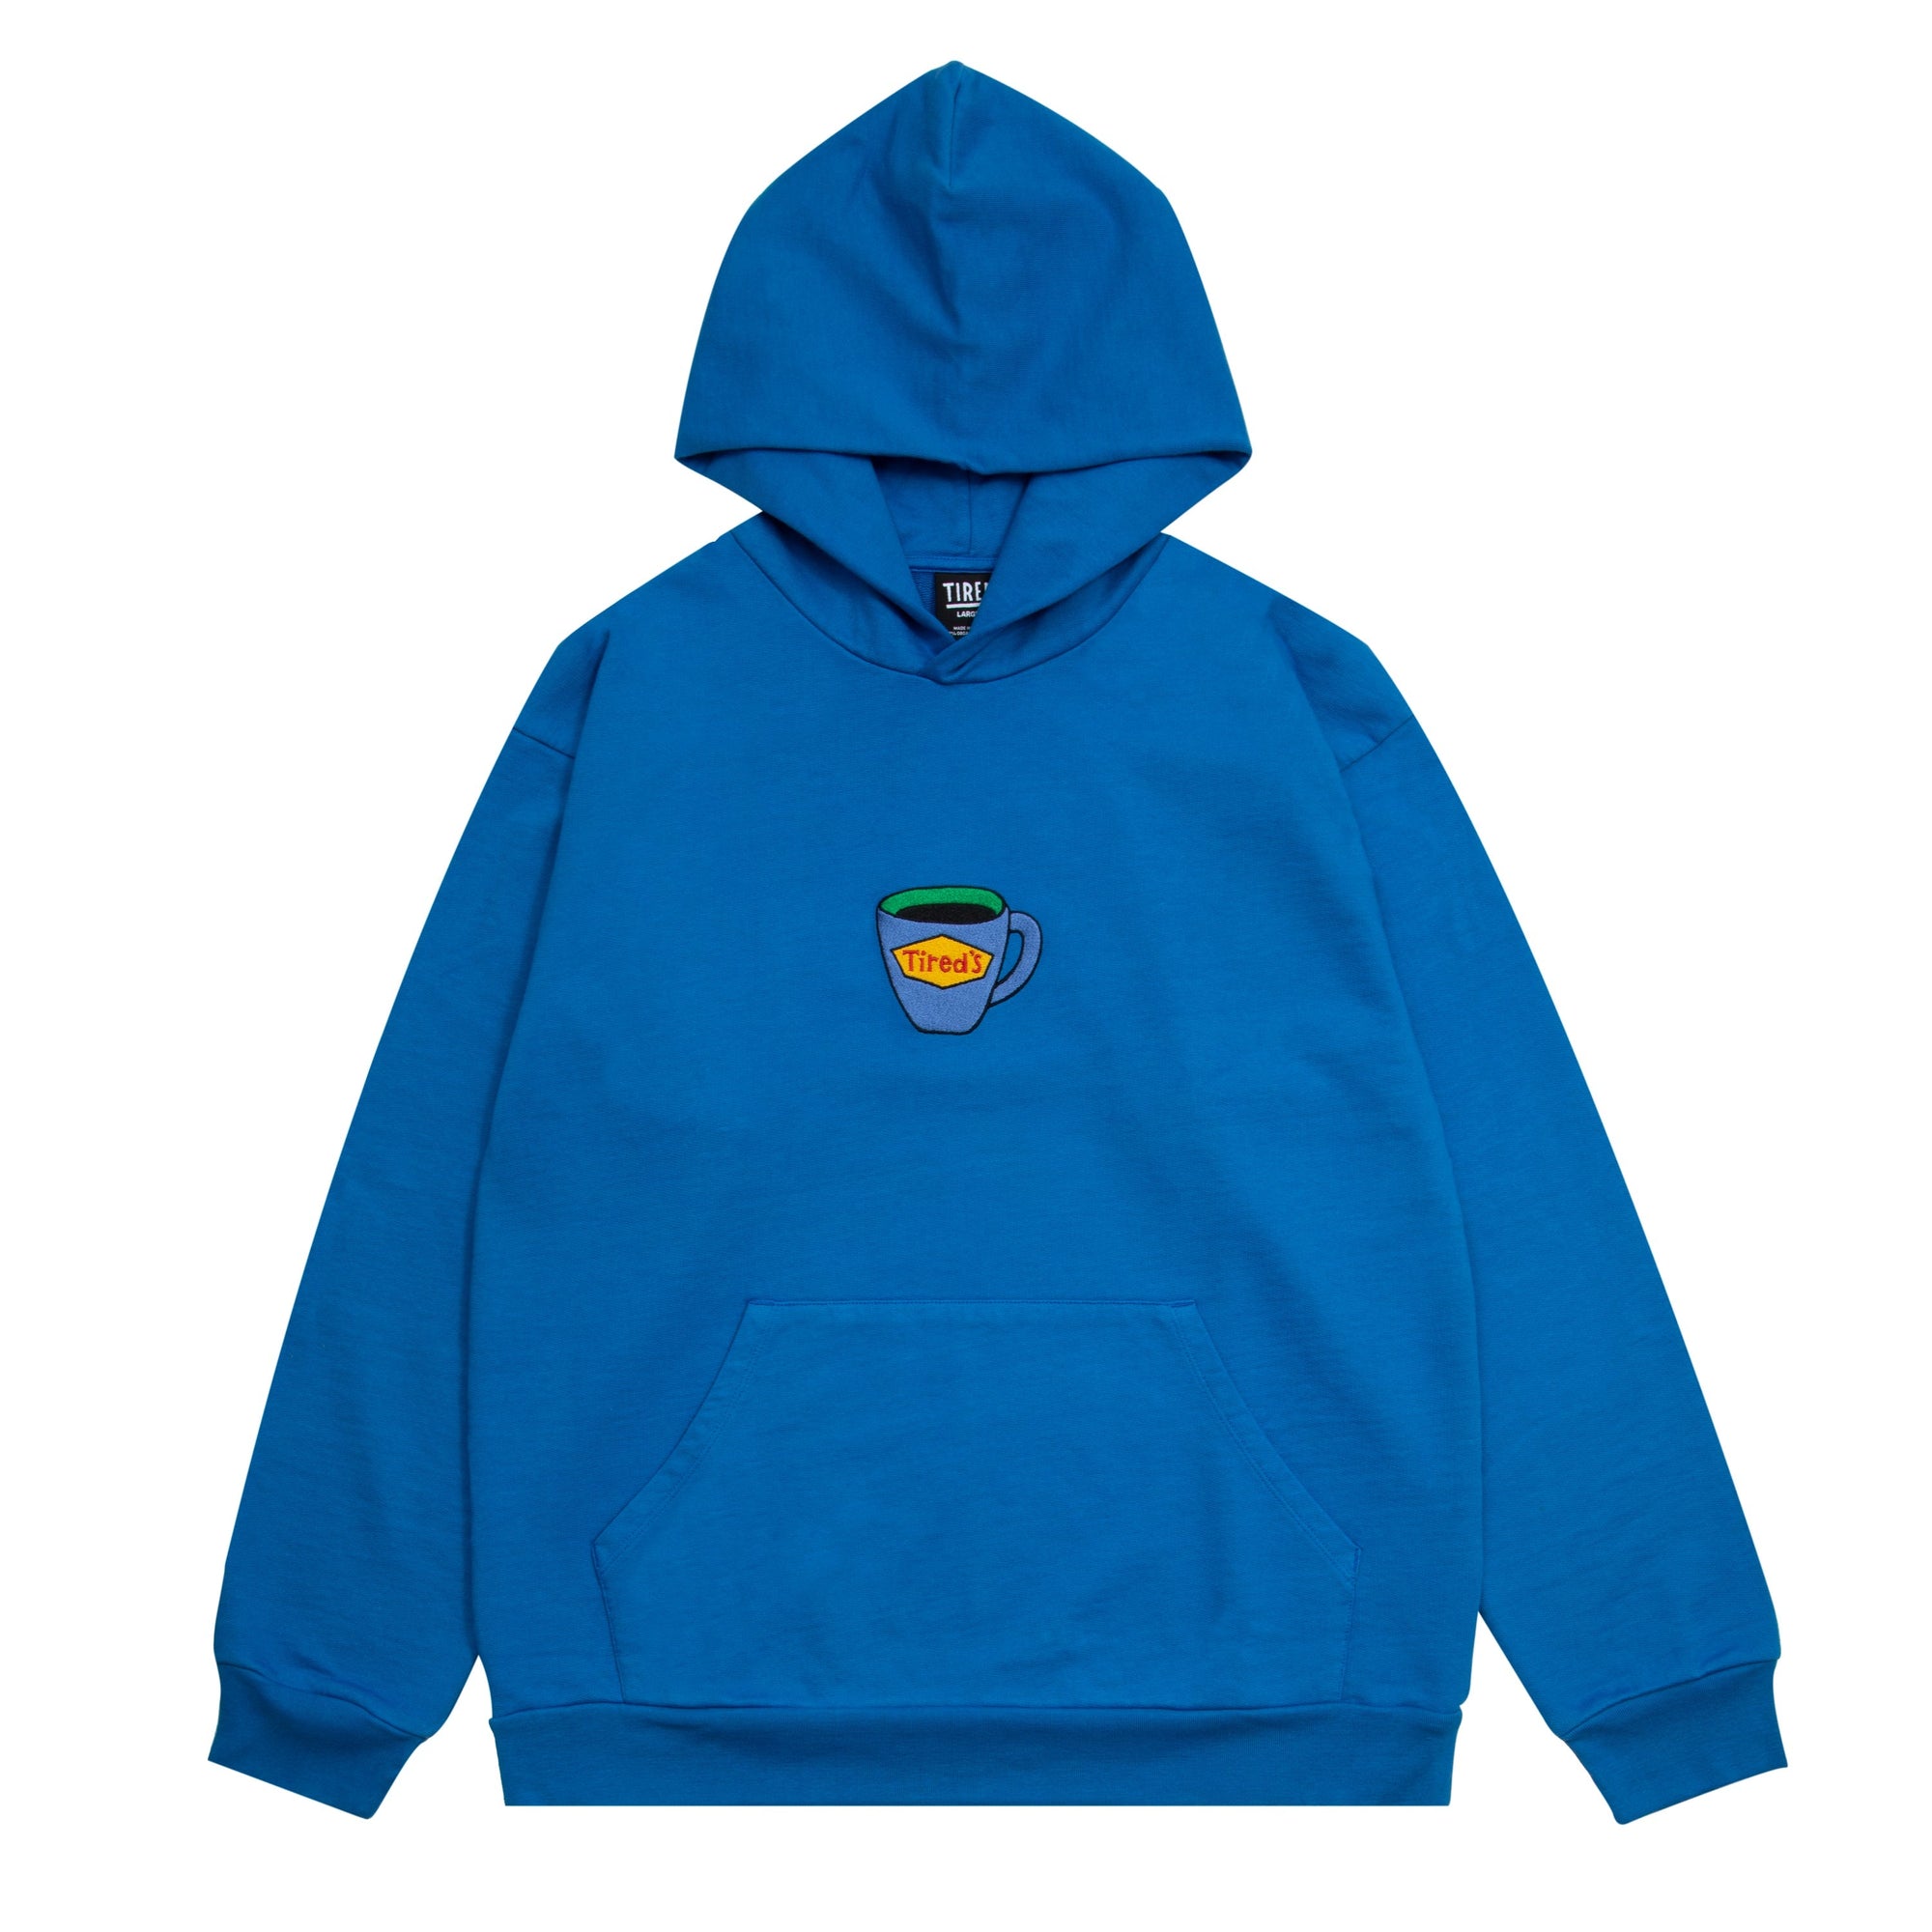 Tired Tired's Hoodie - Royal